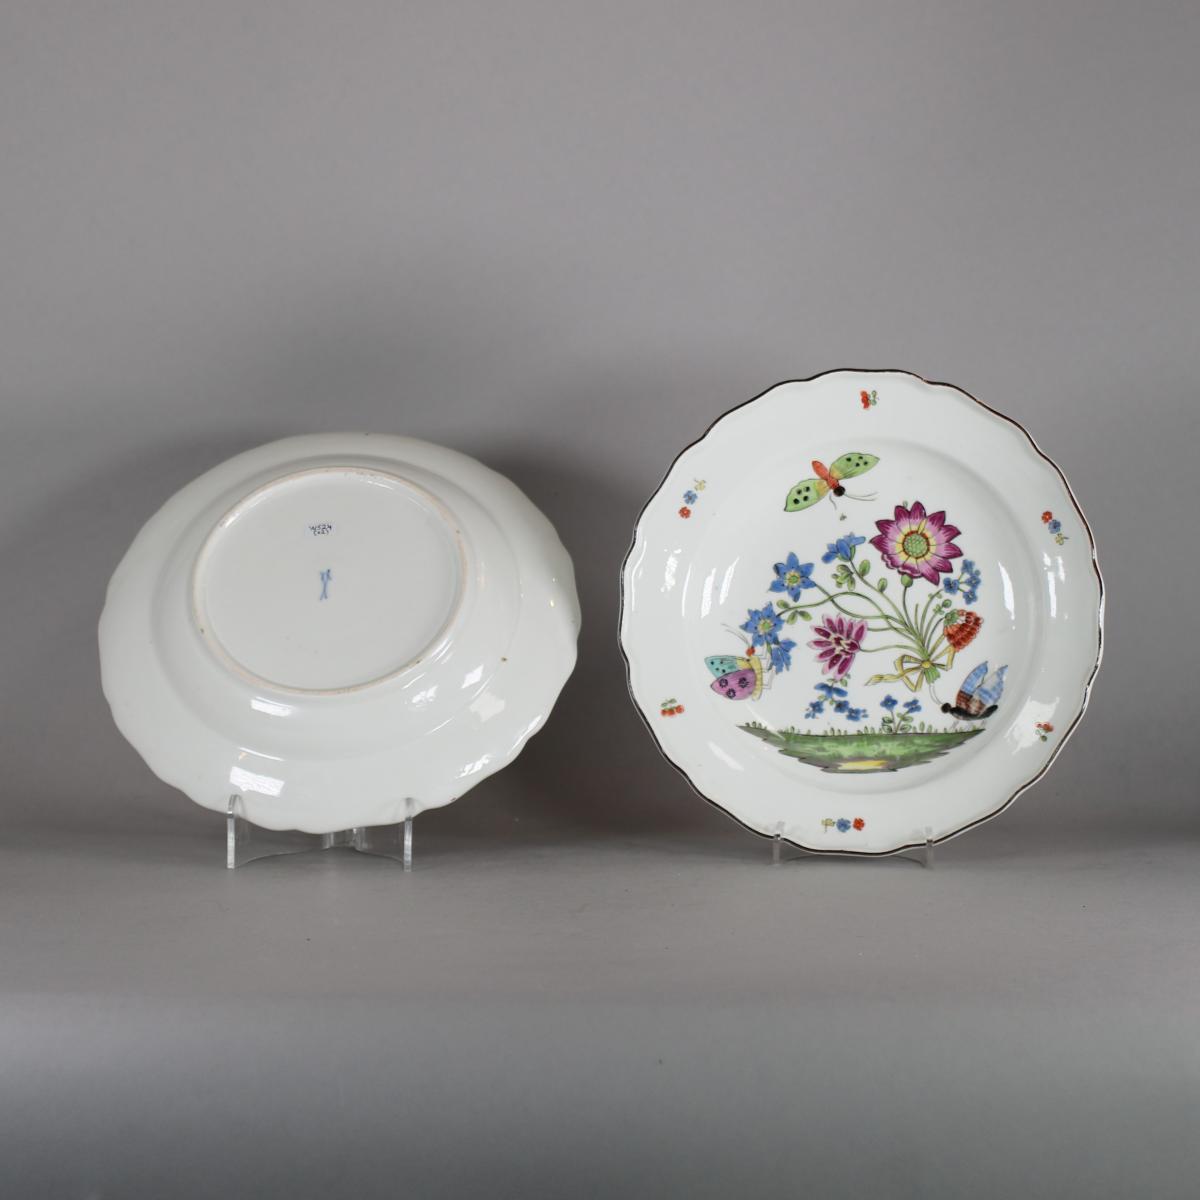 further image of meissen plates